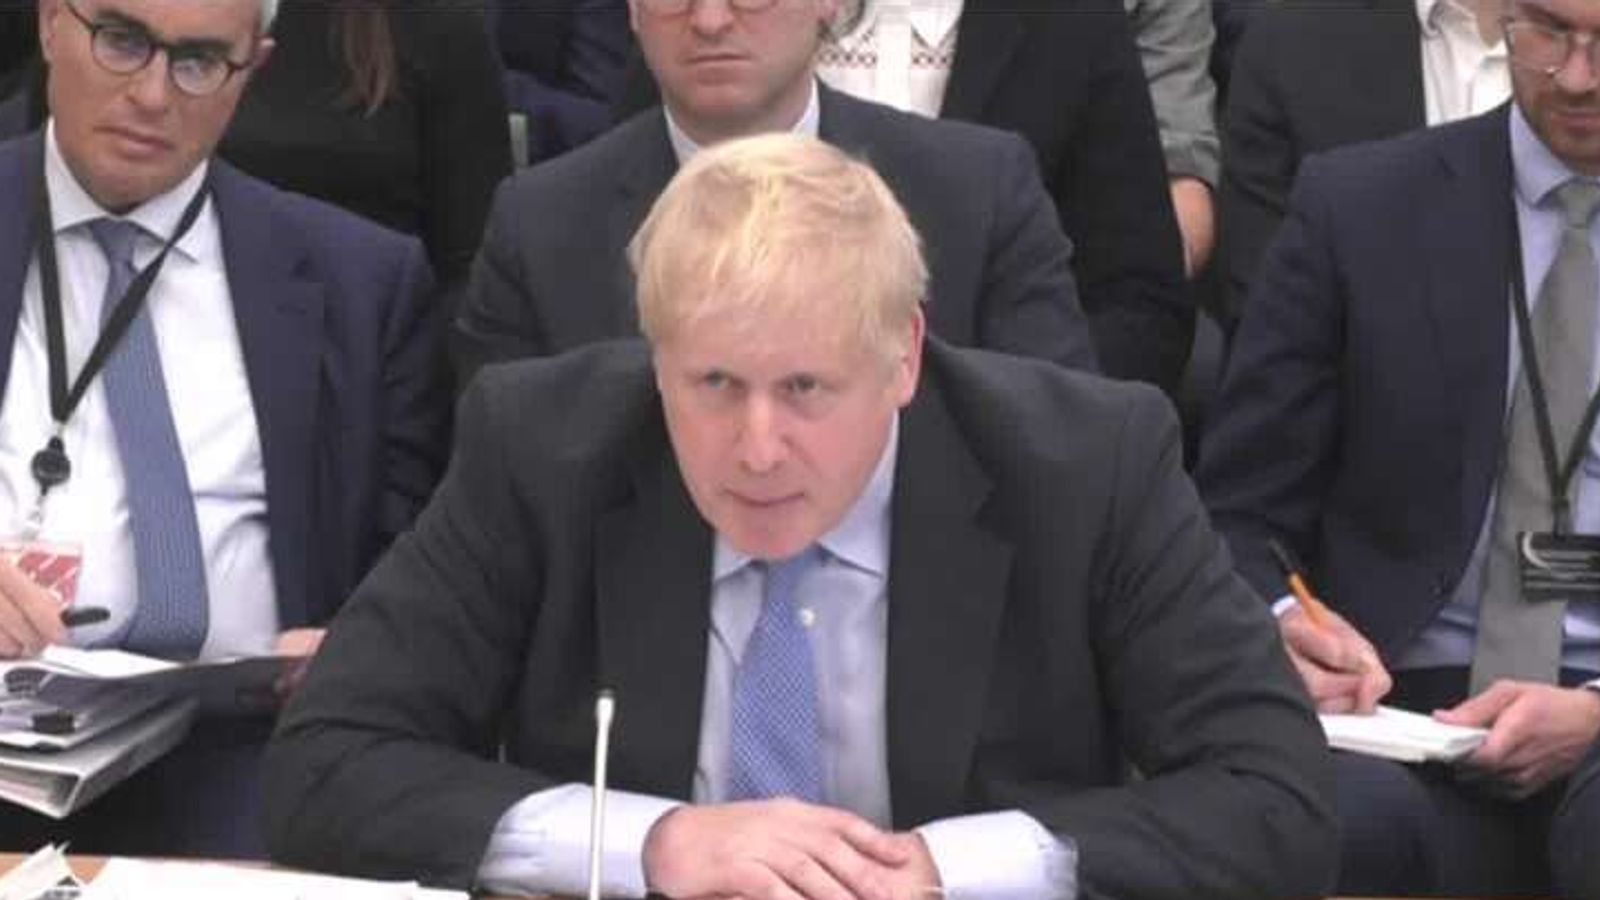 Boris Johnson knowingly misled parliament over partygate, privileges committee finds